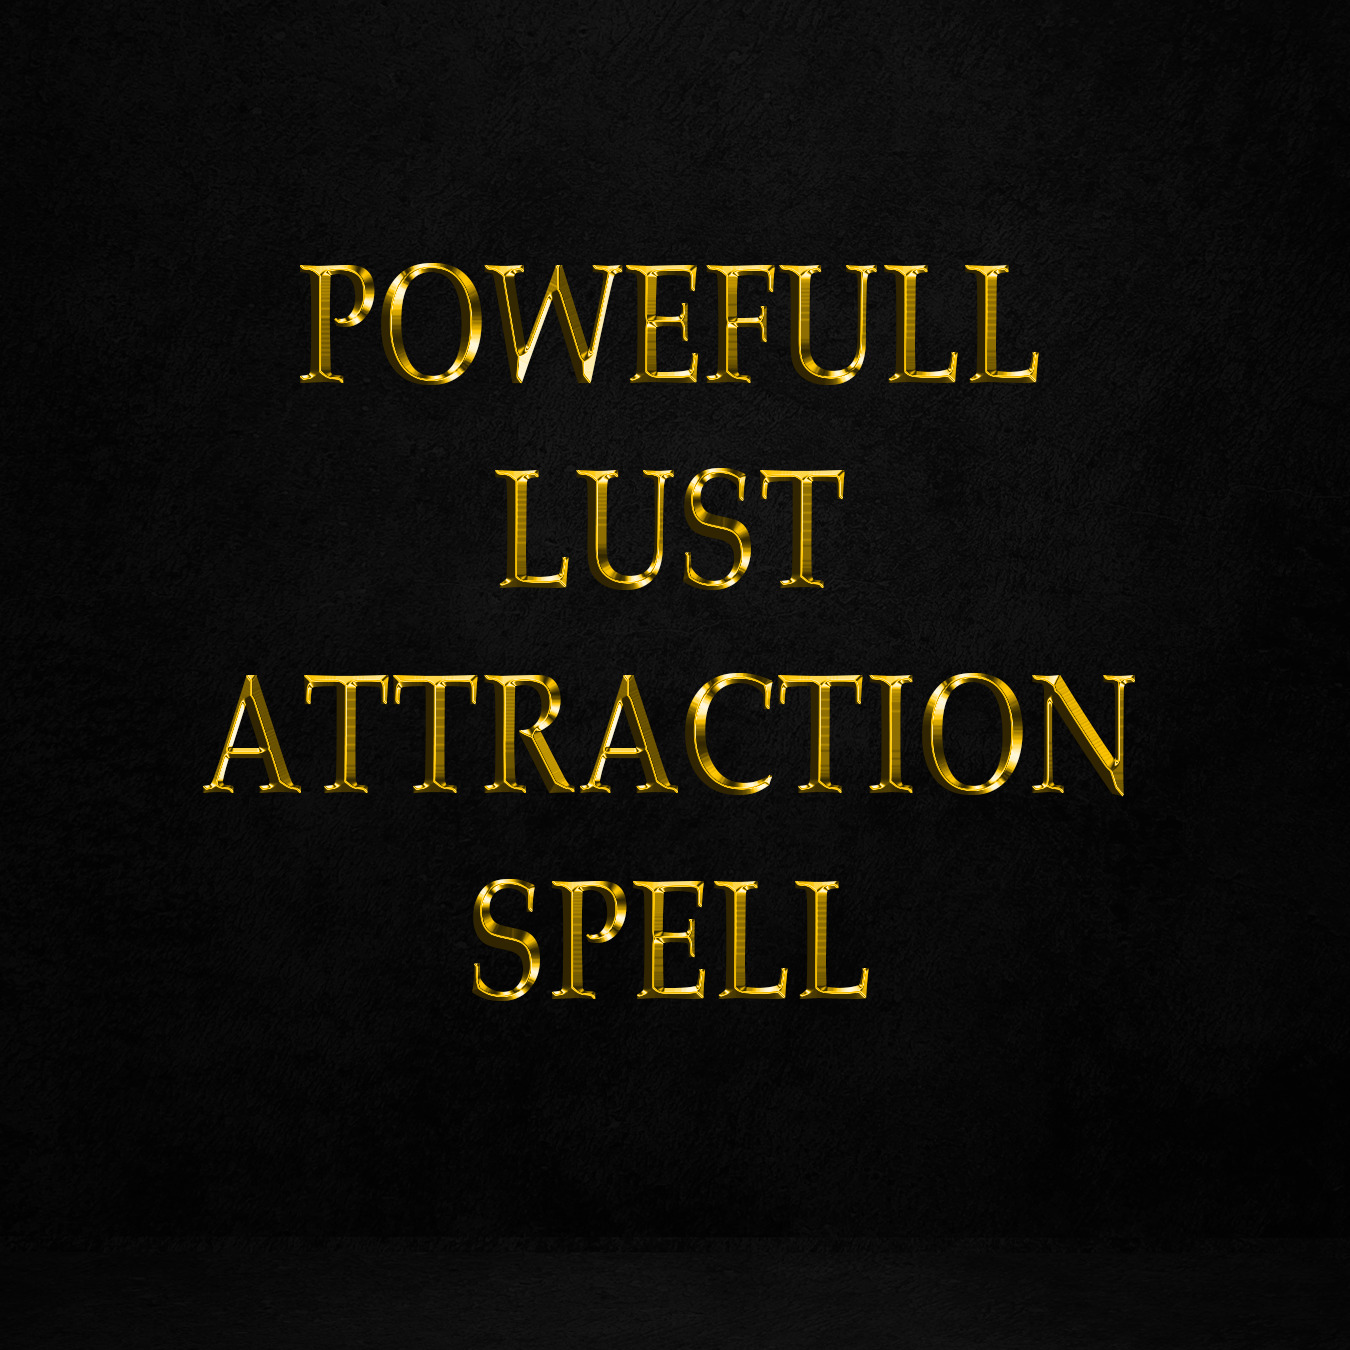 Powerfull Lust Attraction Spell, Strong Magic, Stubborn Target 3 CAST EXTREME